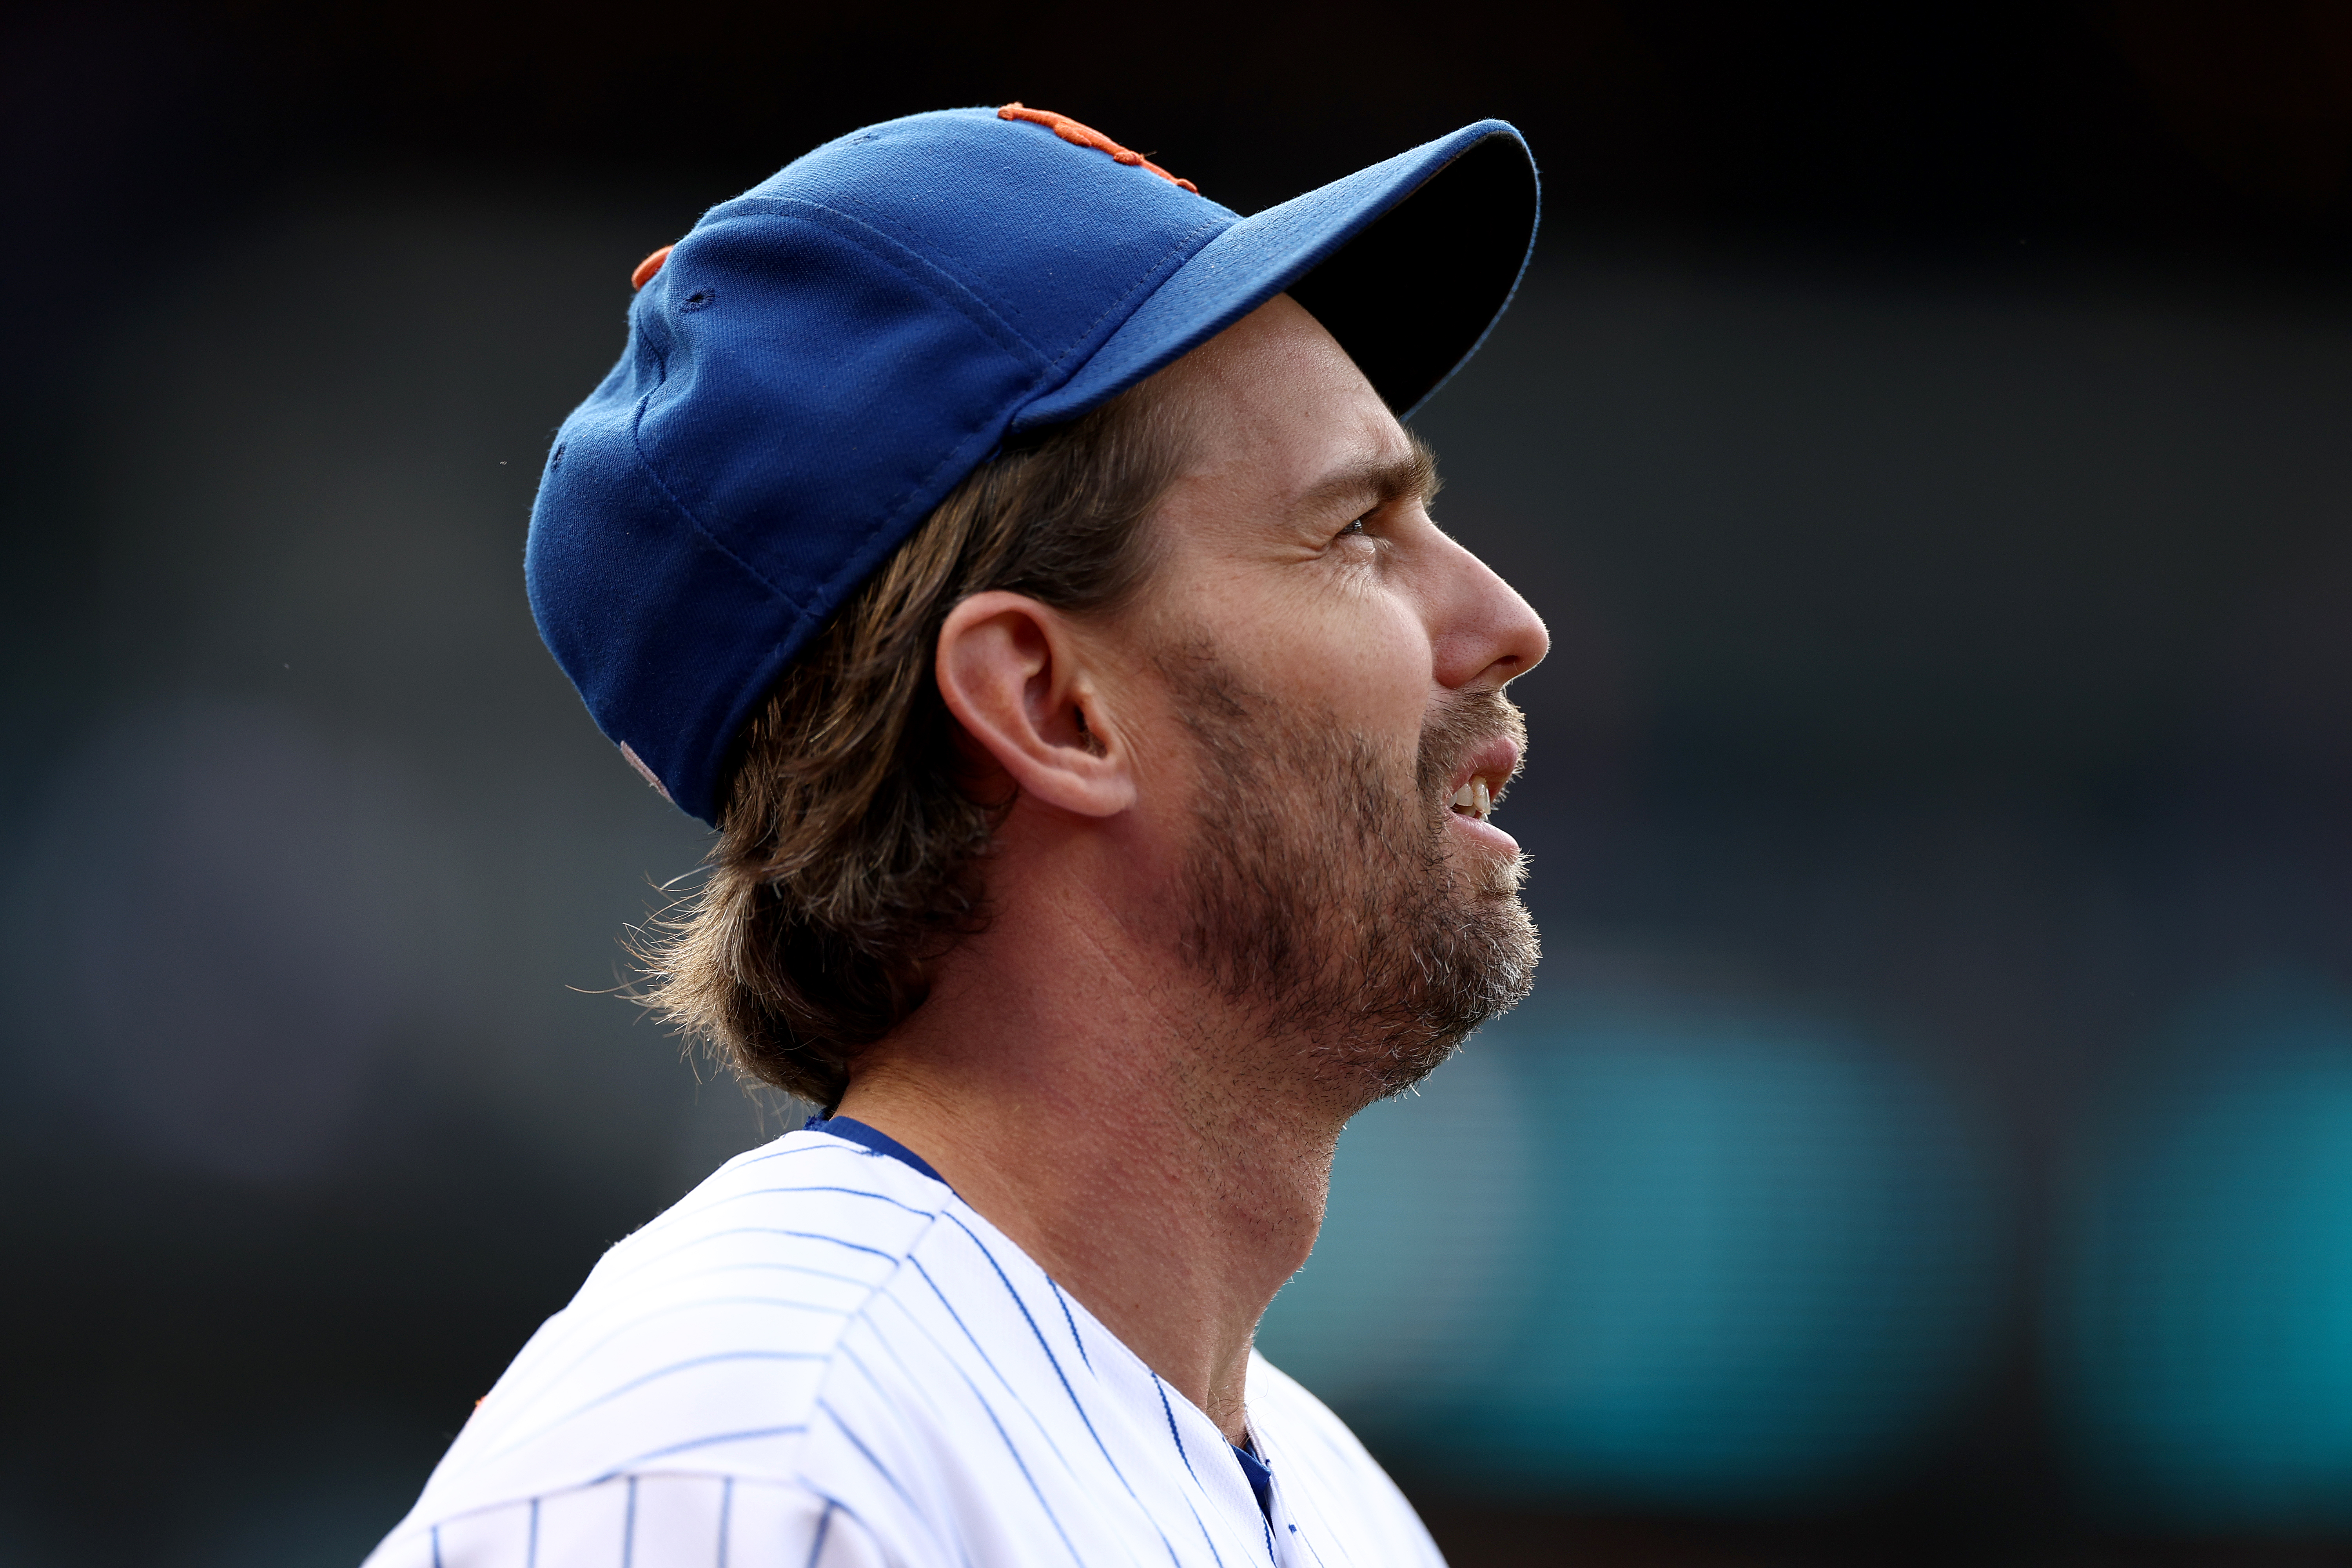 OABT S5 E6: METS ROYALY MIKE PIAZZA JOINS THE SHOW